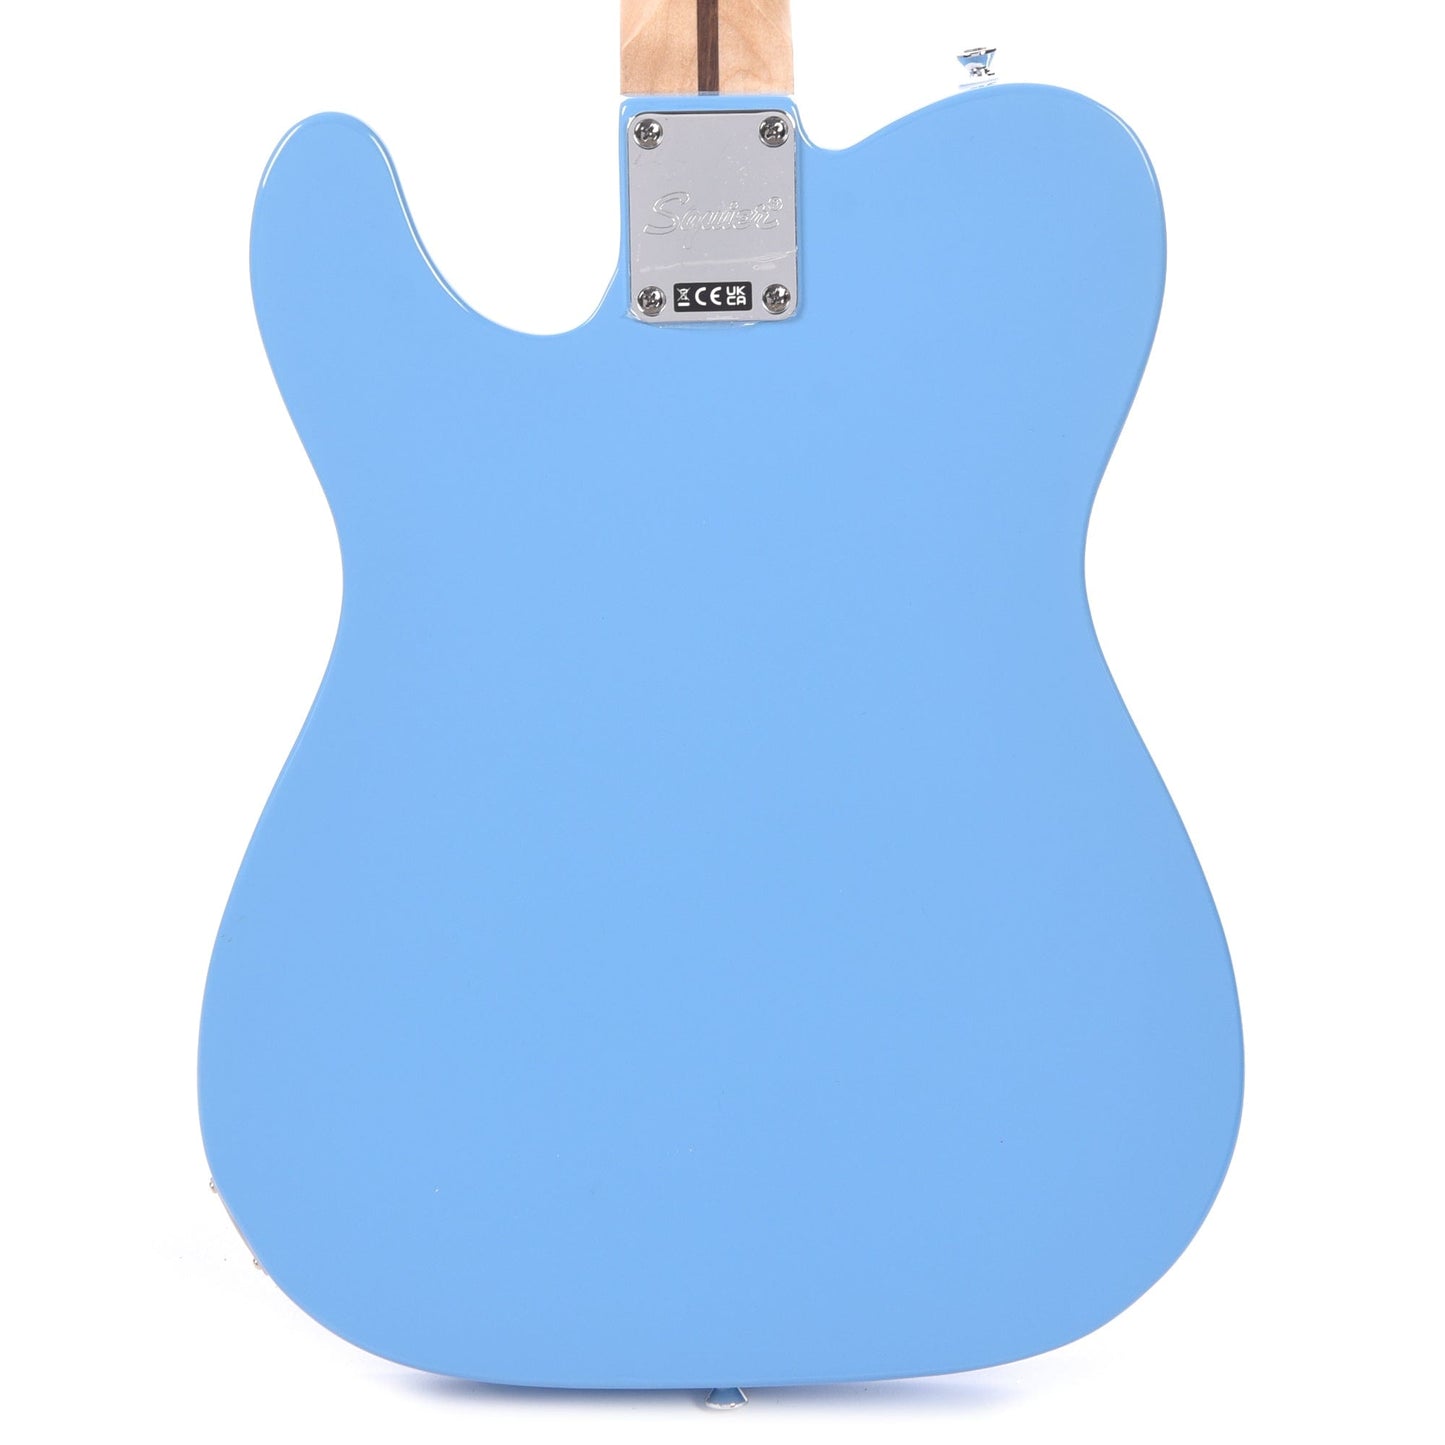 Squier Sonic Telecaster California Blue Electric Guitars / Solid Body